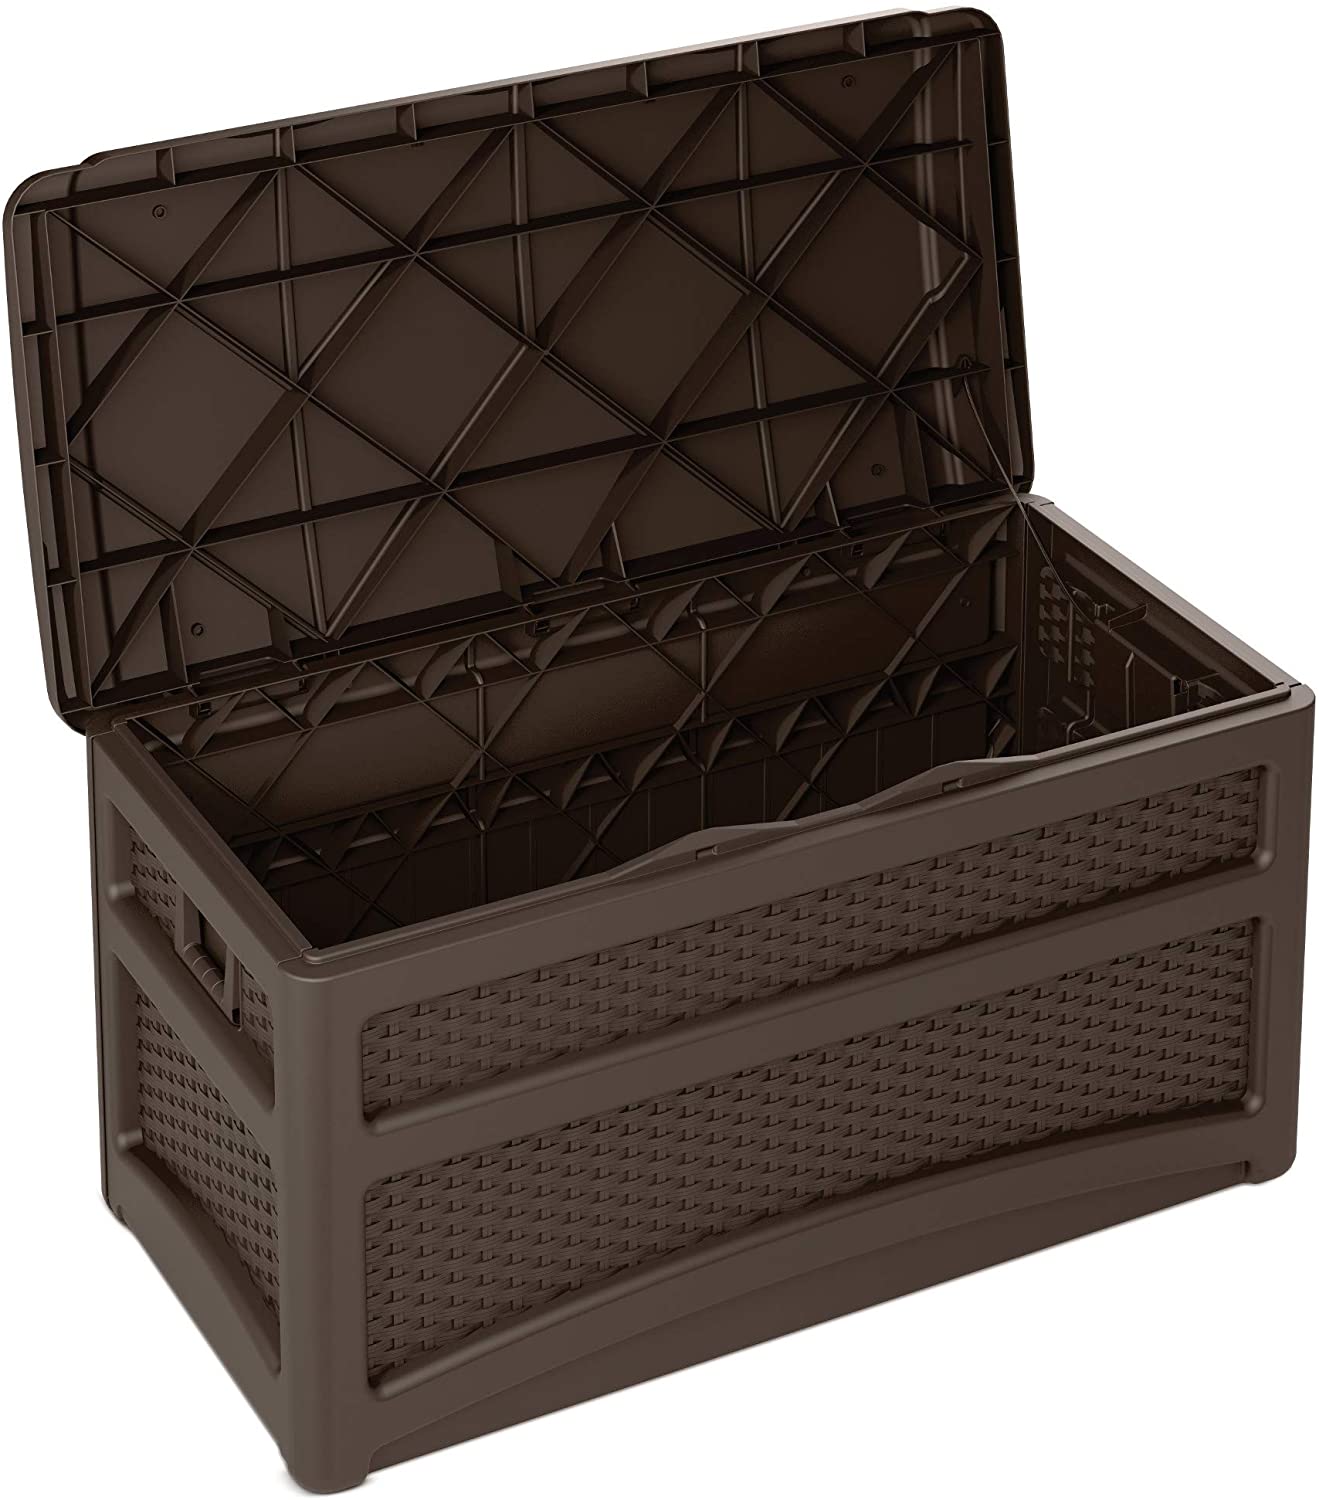 Suncast DBW7500 73 Gallon Outdoor Patio Storage Chest with Handles & Seat, Resin, Java, 39 lb, (L x W x H) 23.75 x 22.5 x 46 inches - image 1 of 7